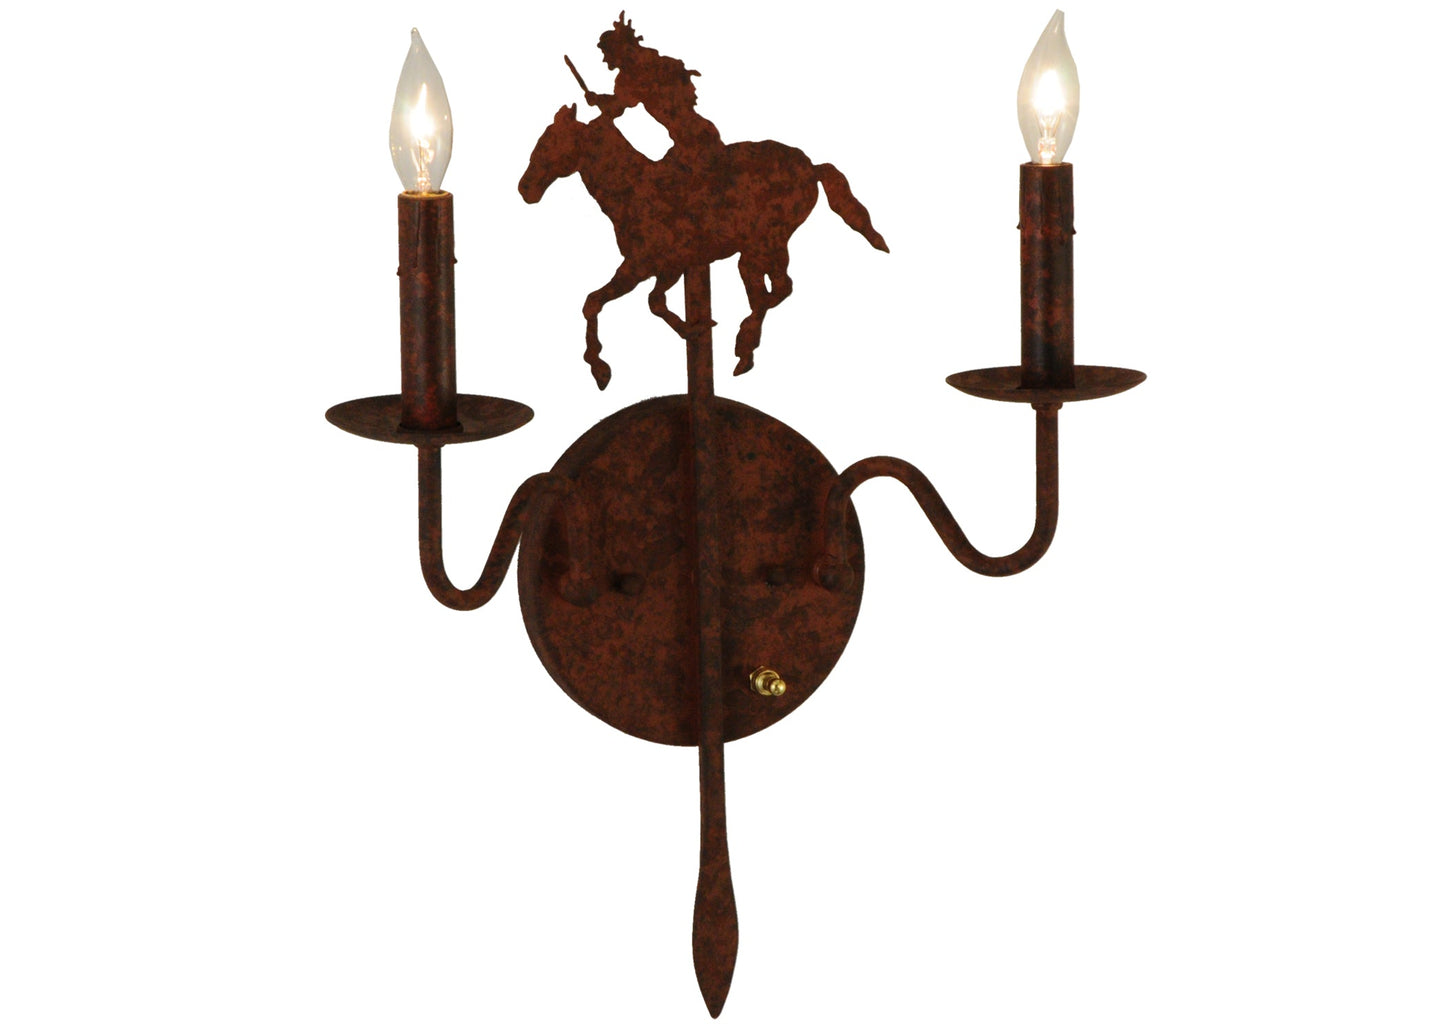 13" High Plains Rider 2-Light Wall Sconce by 2nd Ave Lighting